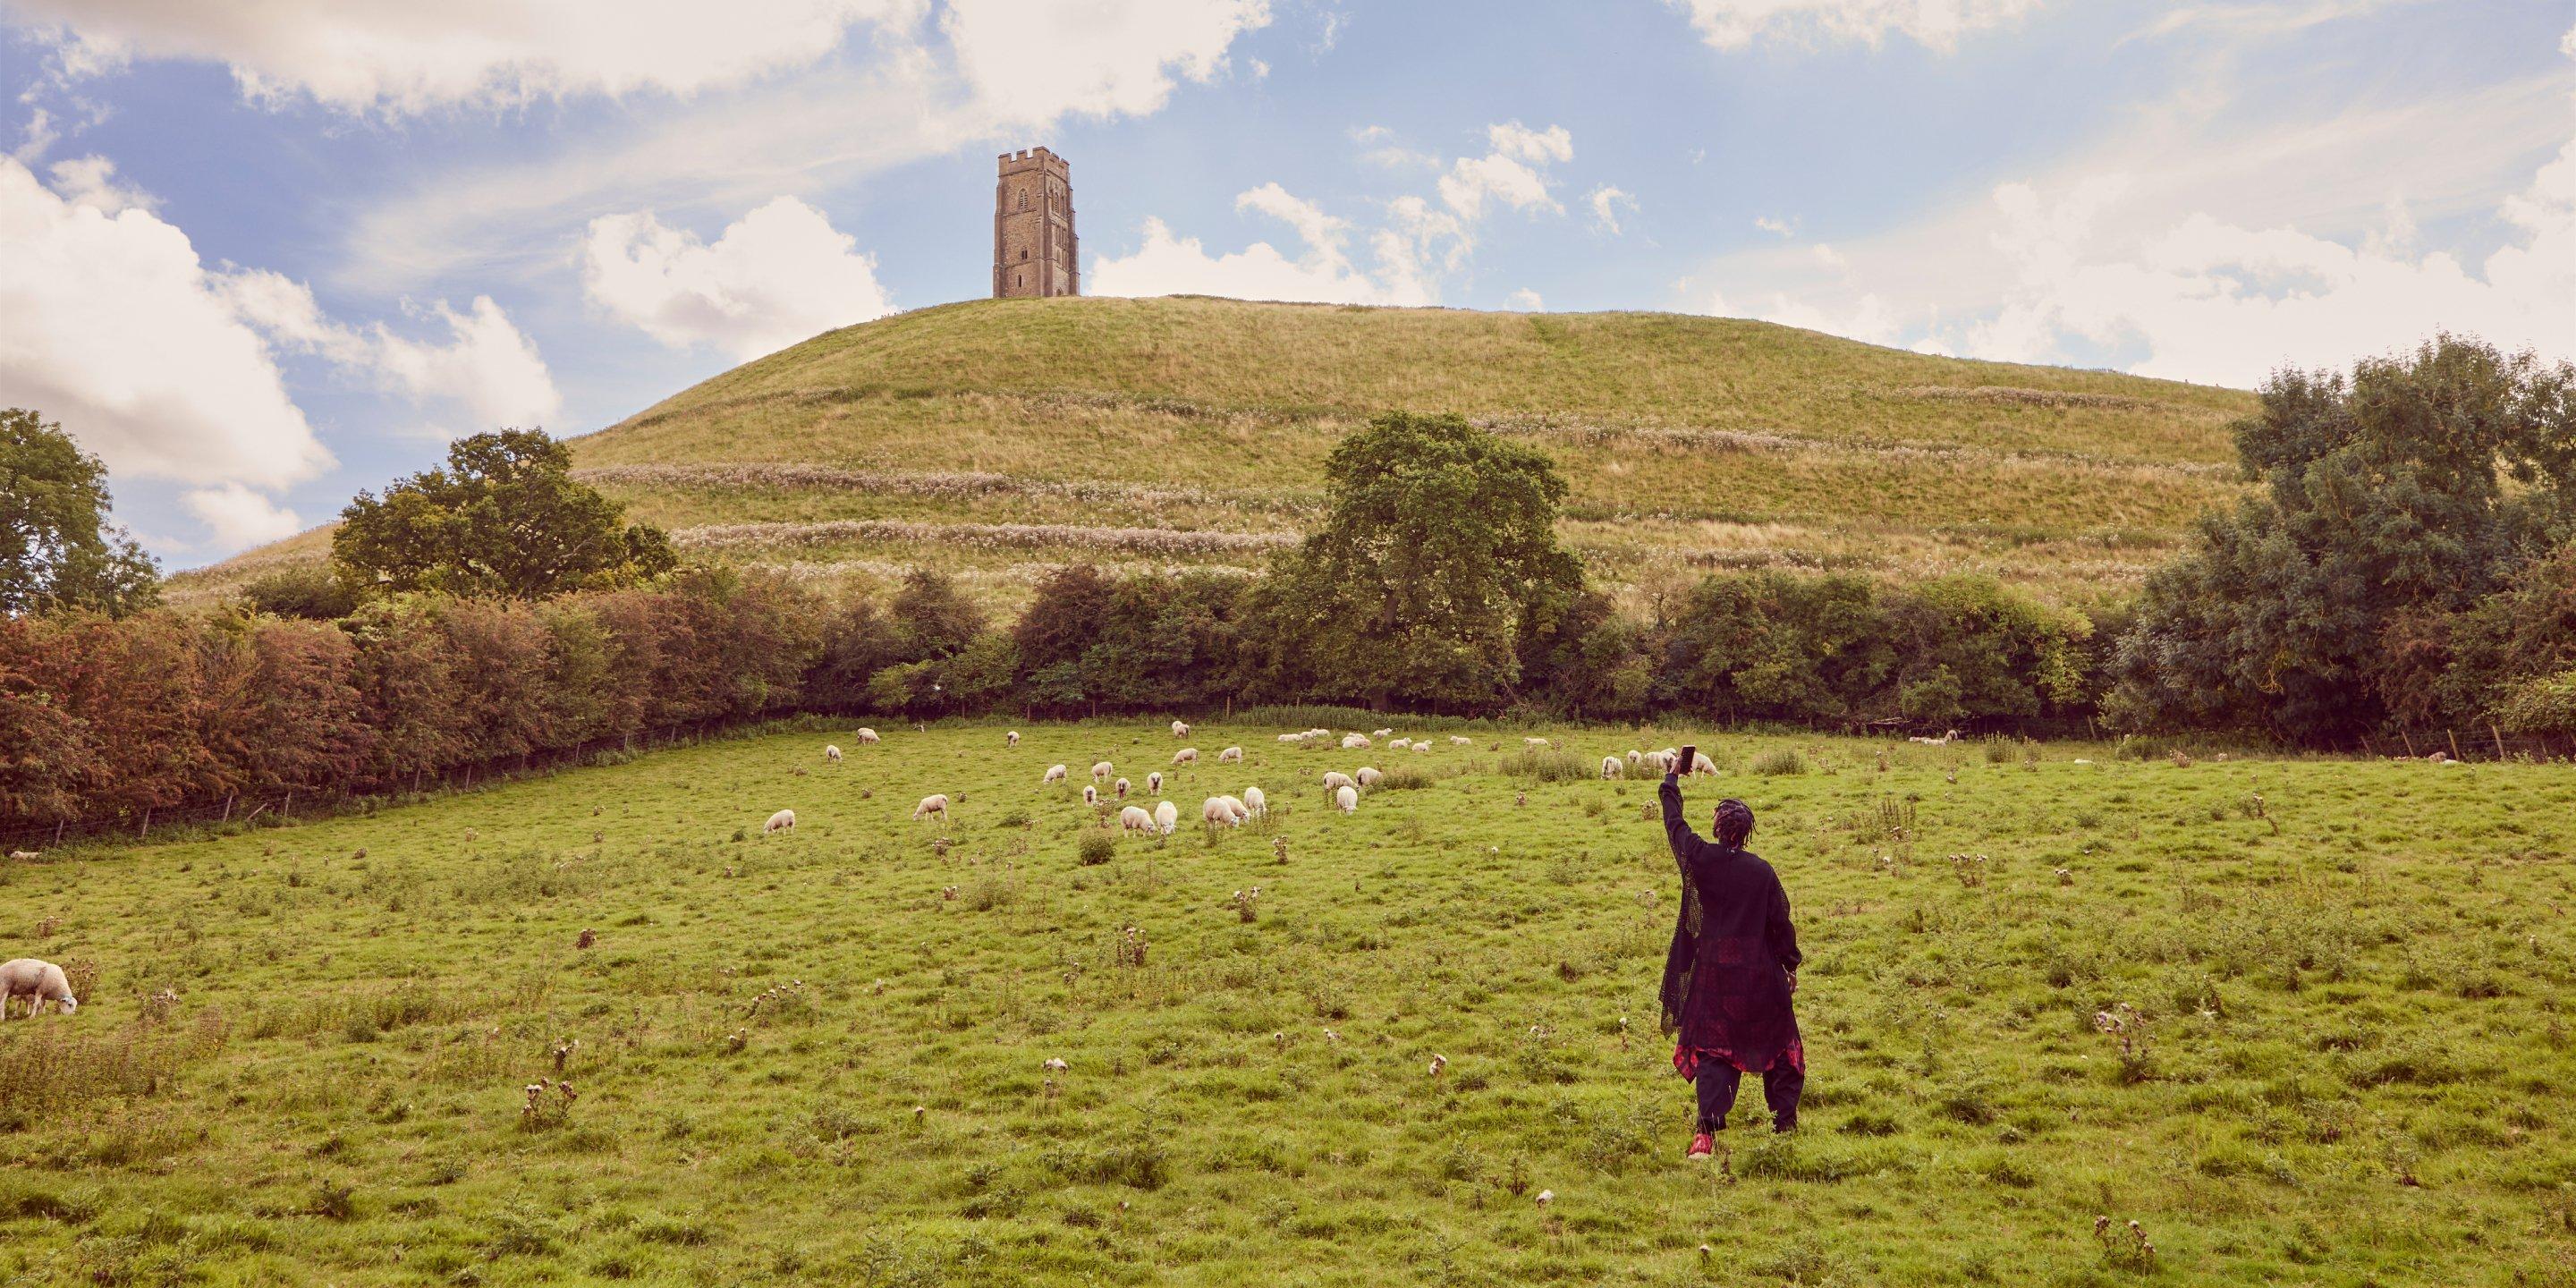 Popcaan standing in a field with sheep in the background taking a photo of Glastonbury Tor